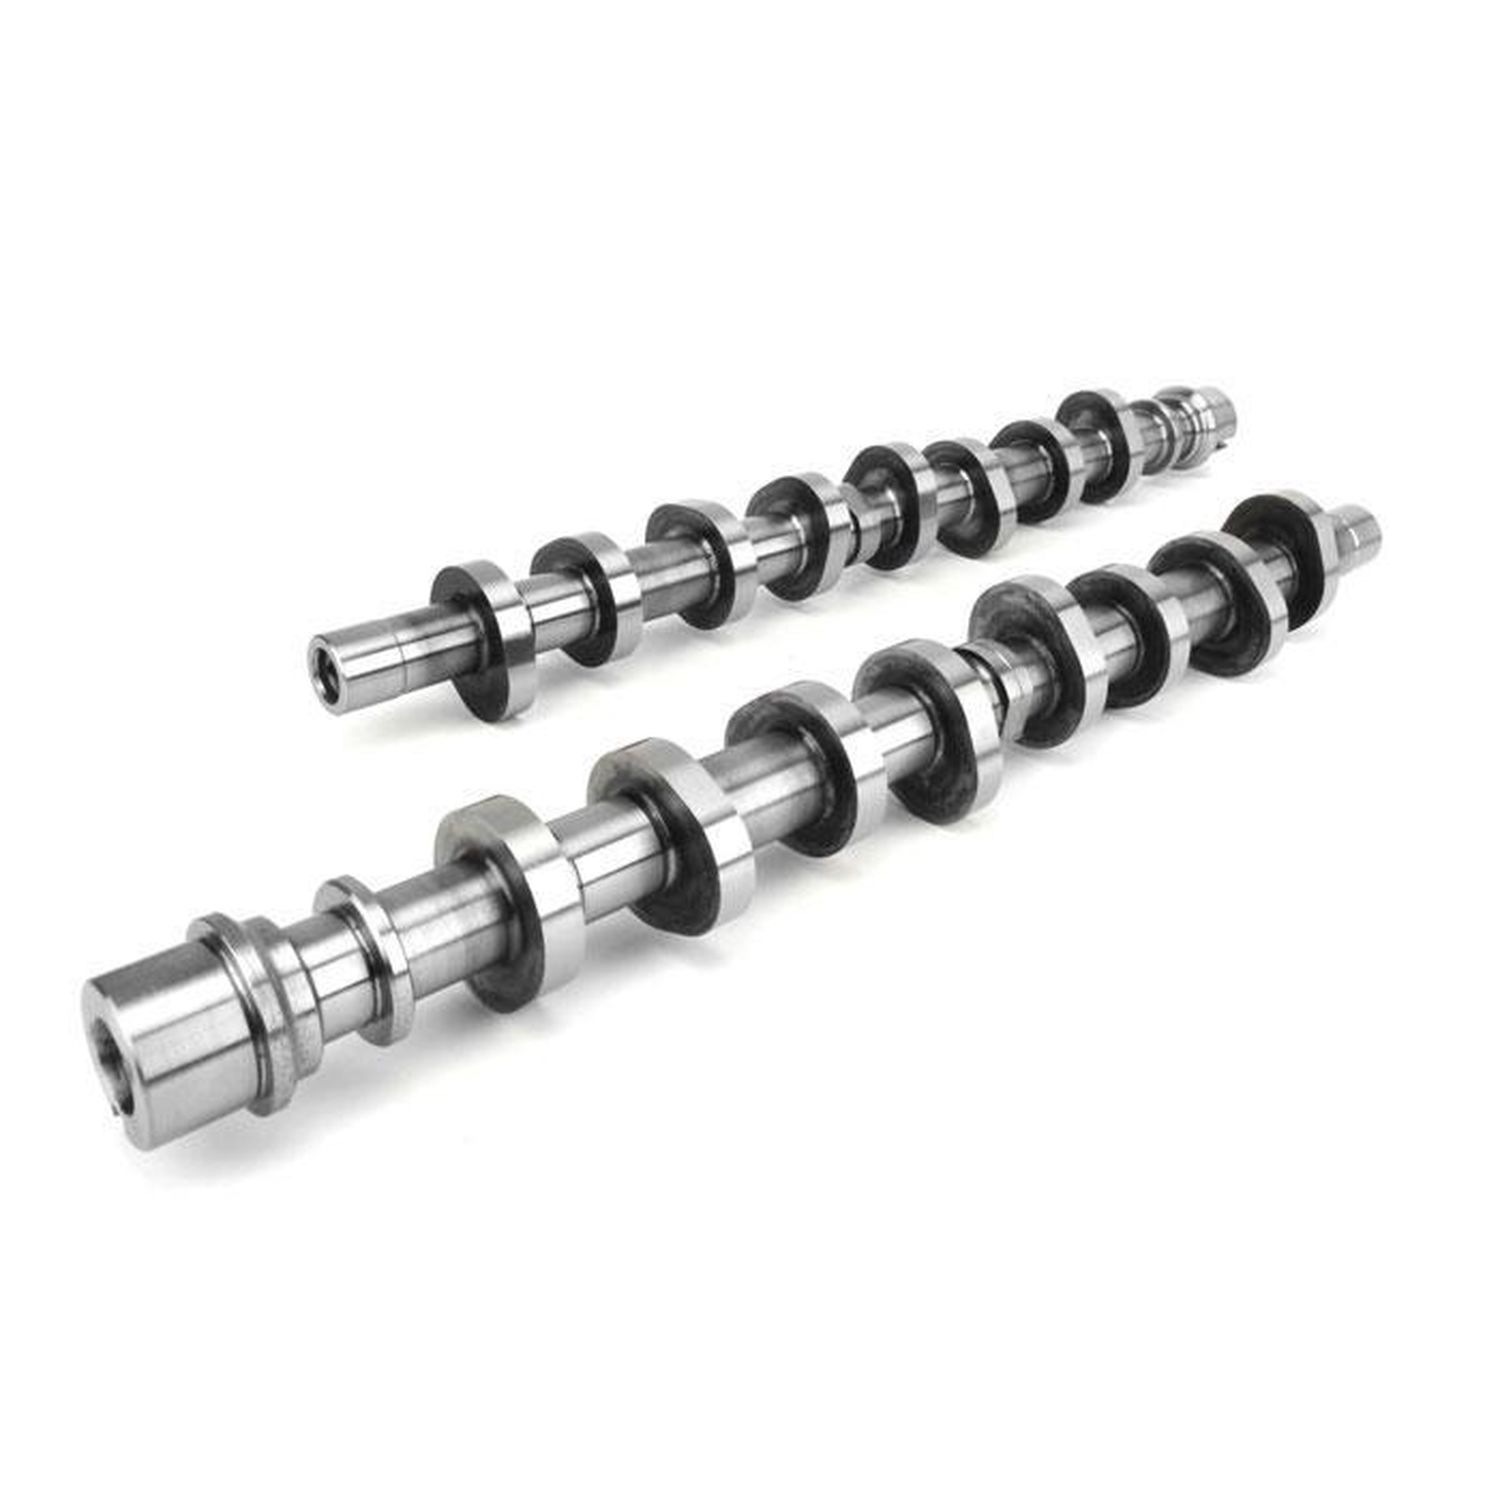 Comp Cams Xtreme Energy Performance Camshaft XE274H 236/240 Cams for Ford  4.6/5.4L Modular Valve 102300